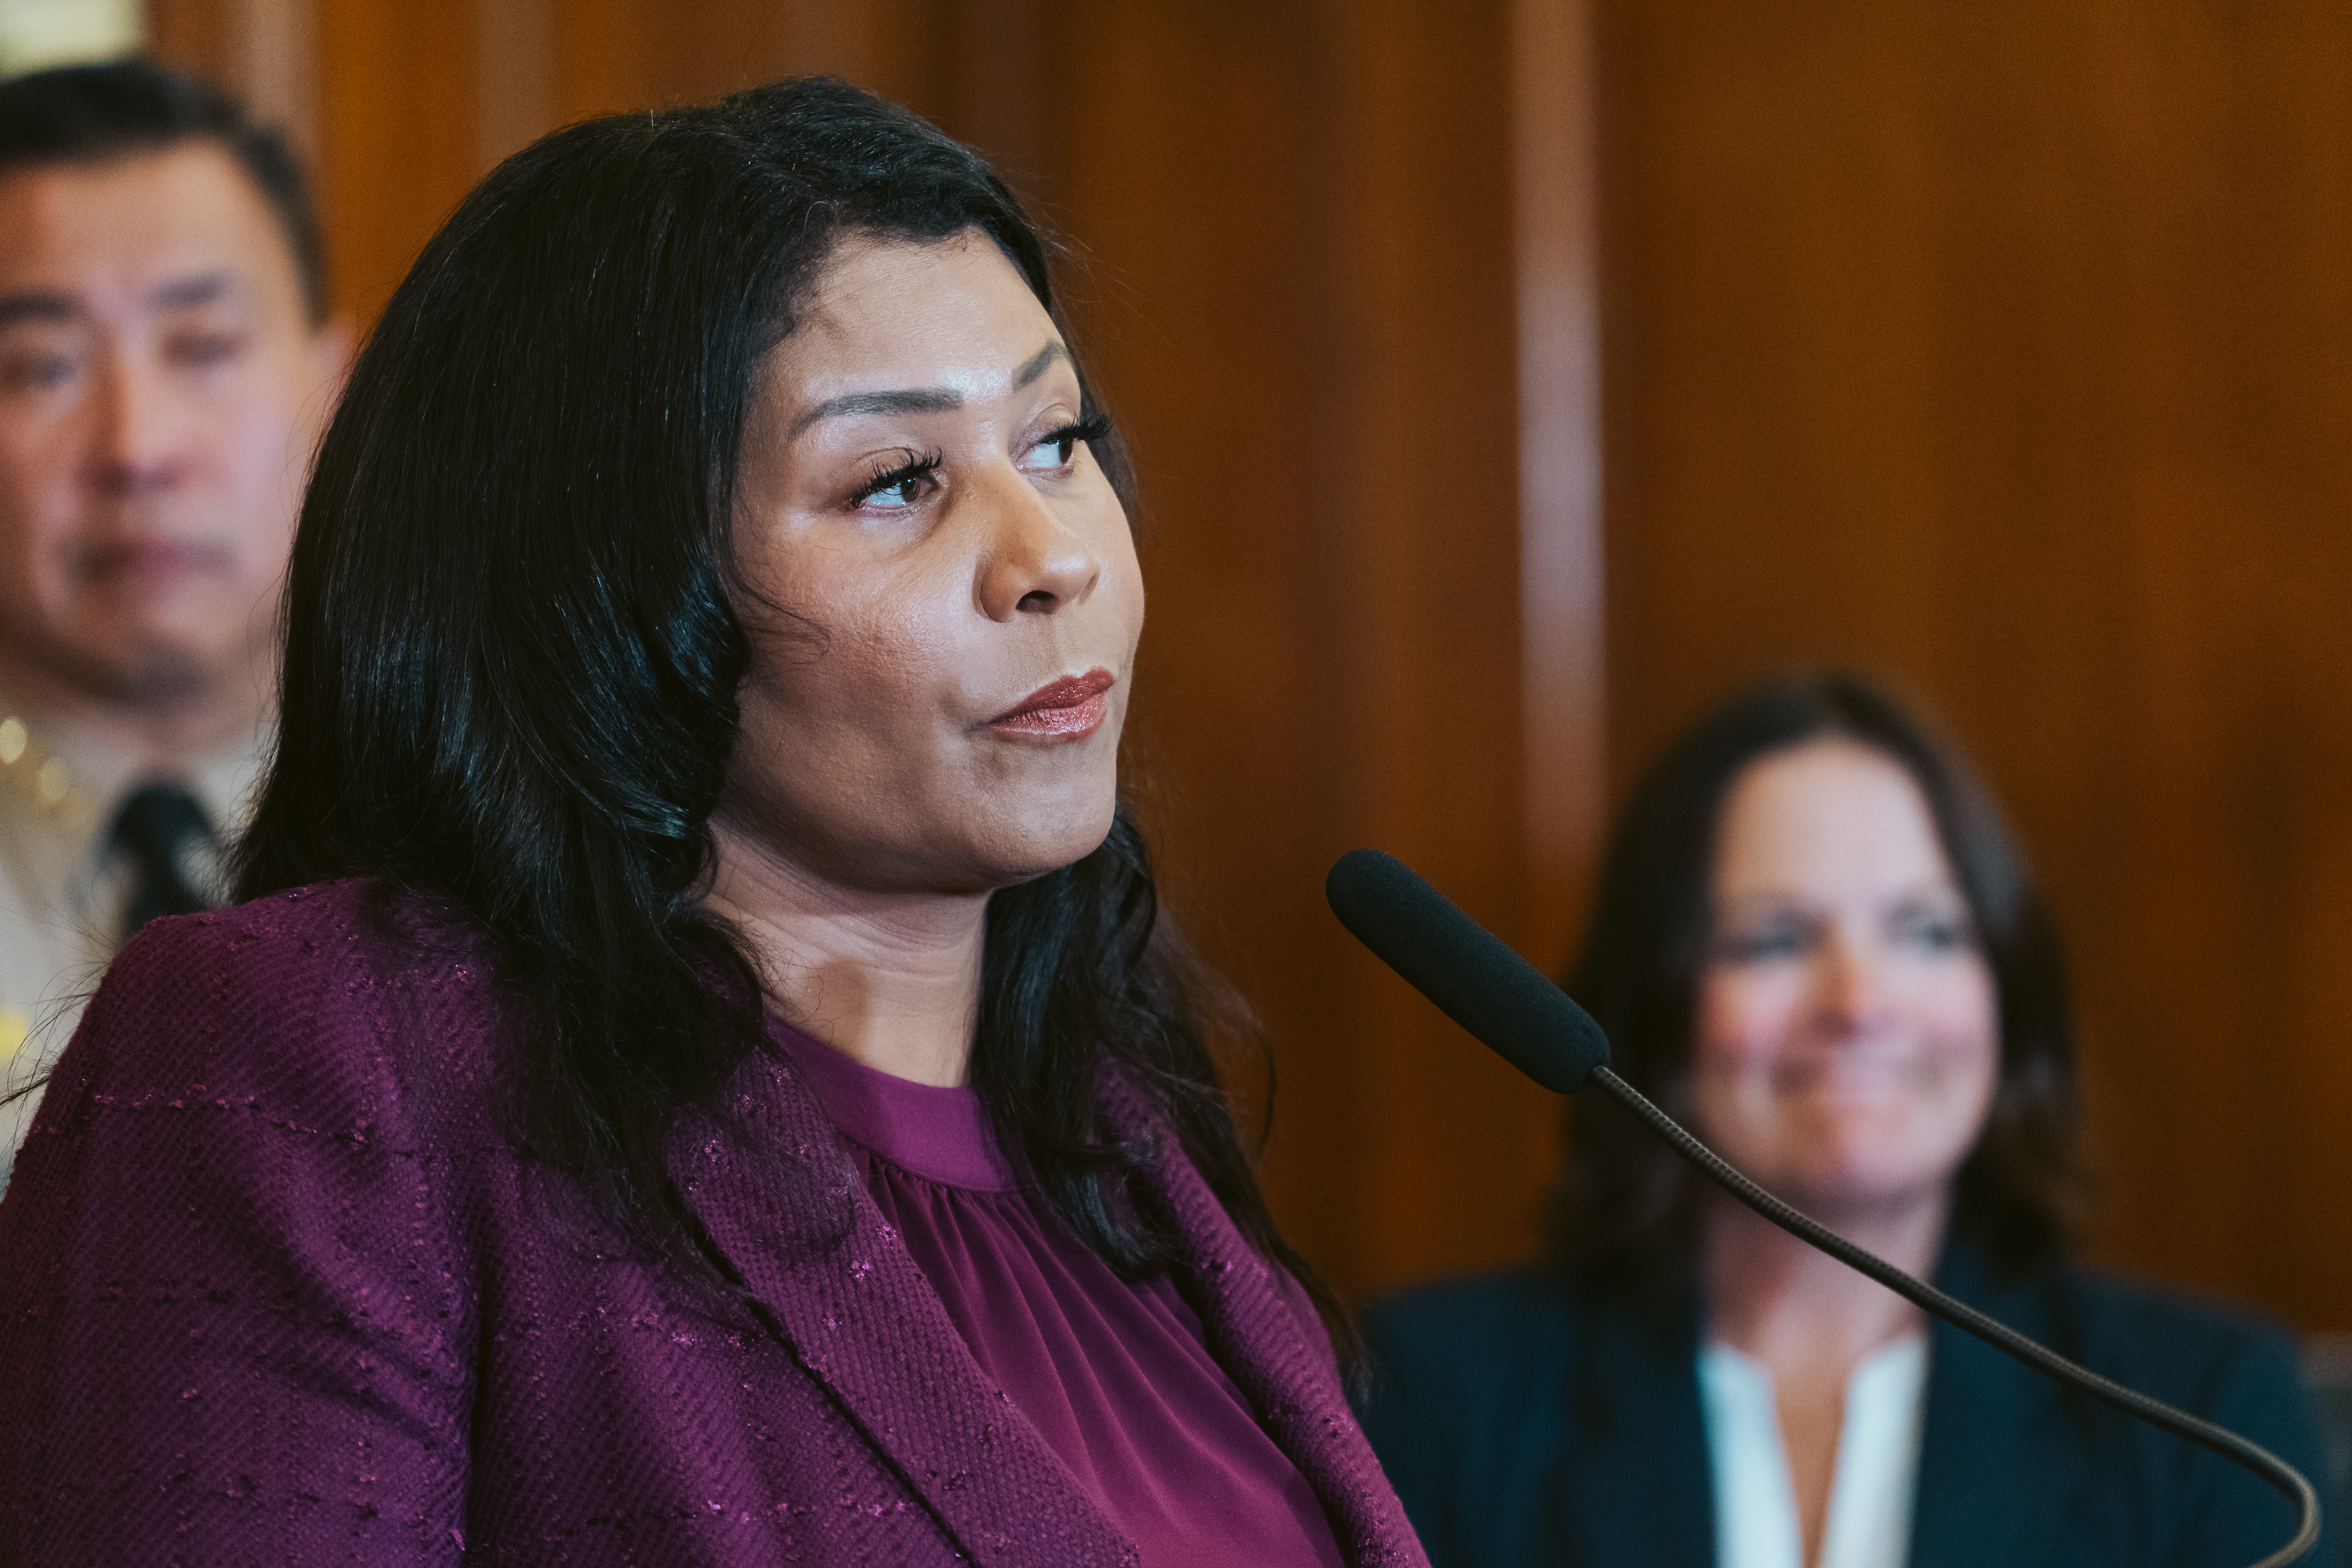 San Francisco Mayor London Breed looks on during a press conference at City Hall.